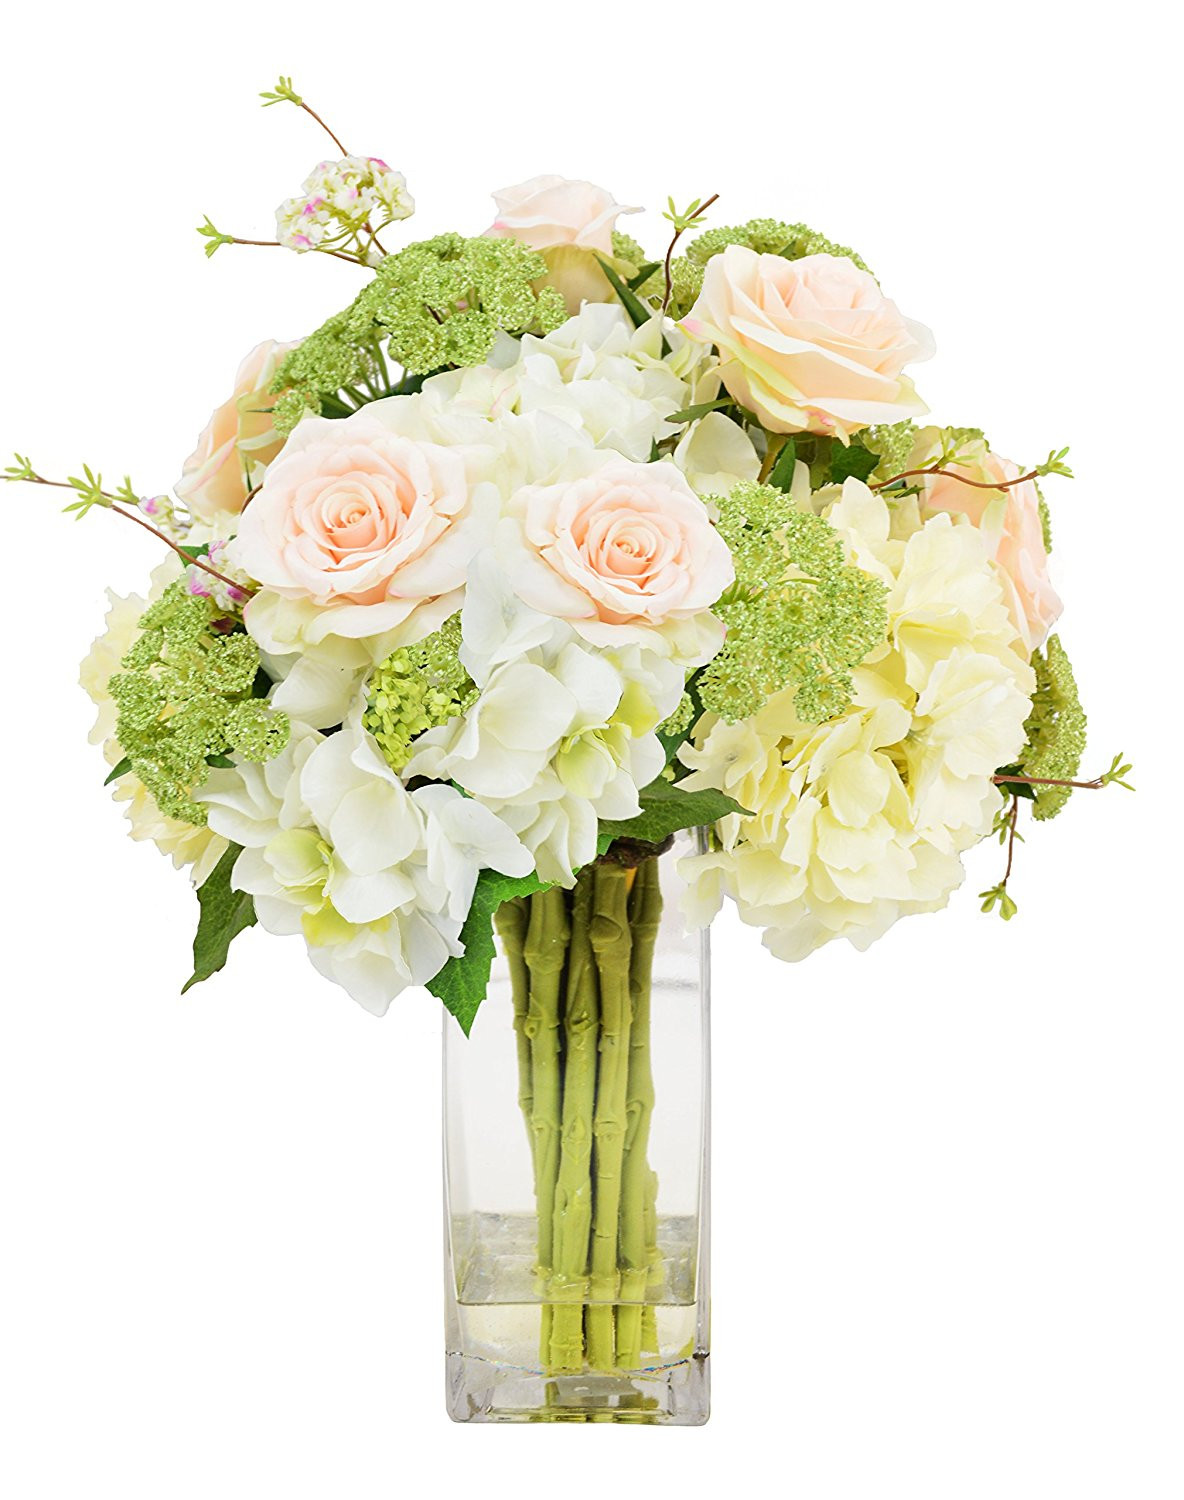 17 Fabulous 40 Inch Tall Glass Cylinder Vases 2024 free download 40 inch tall glass cylinder vases of cheap tall square water glass cups find tall square water glass throughout get quotations ac2b7 creative displays cream hydrangeas green queen anns lace 